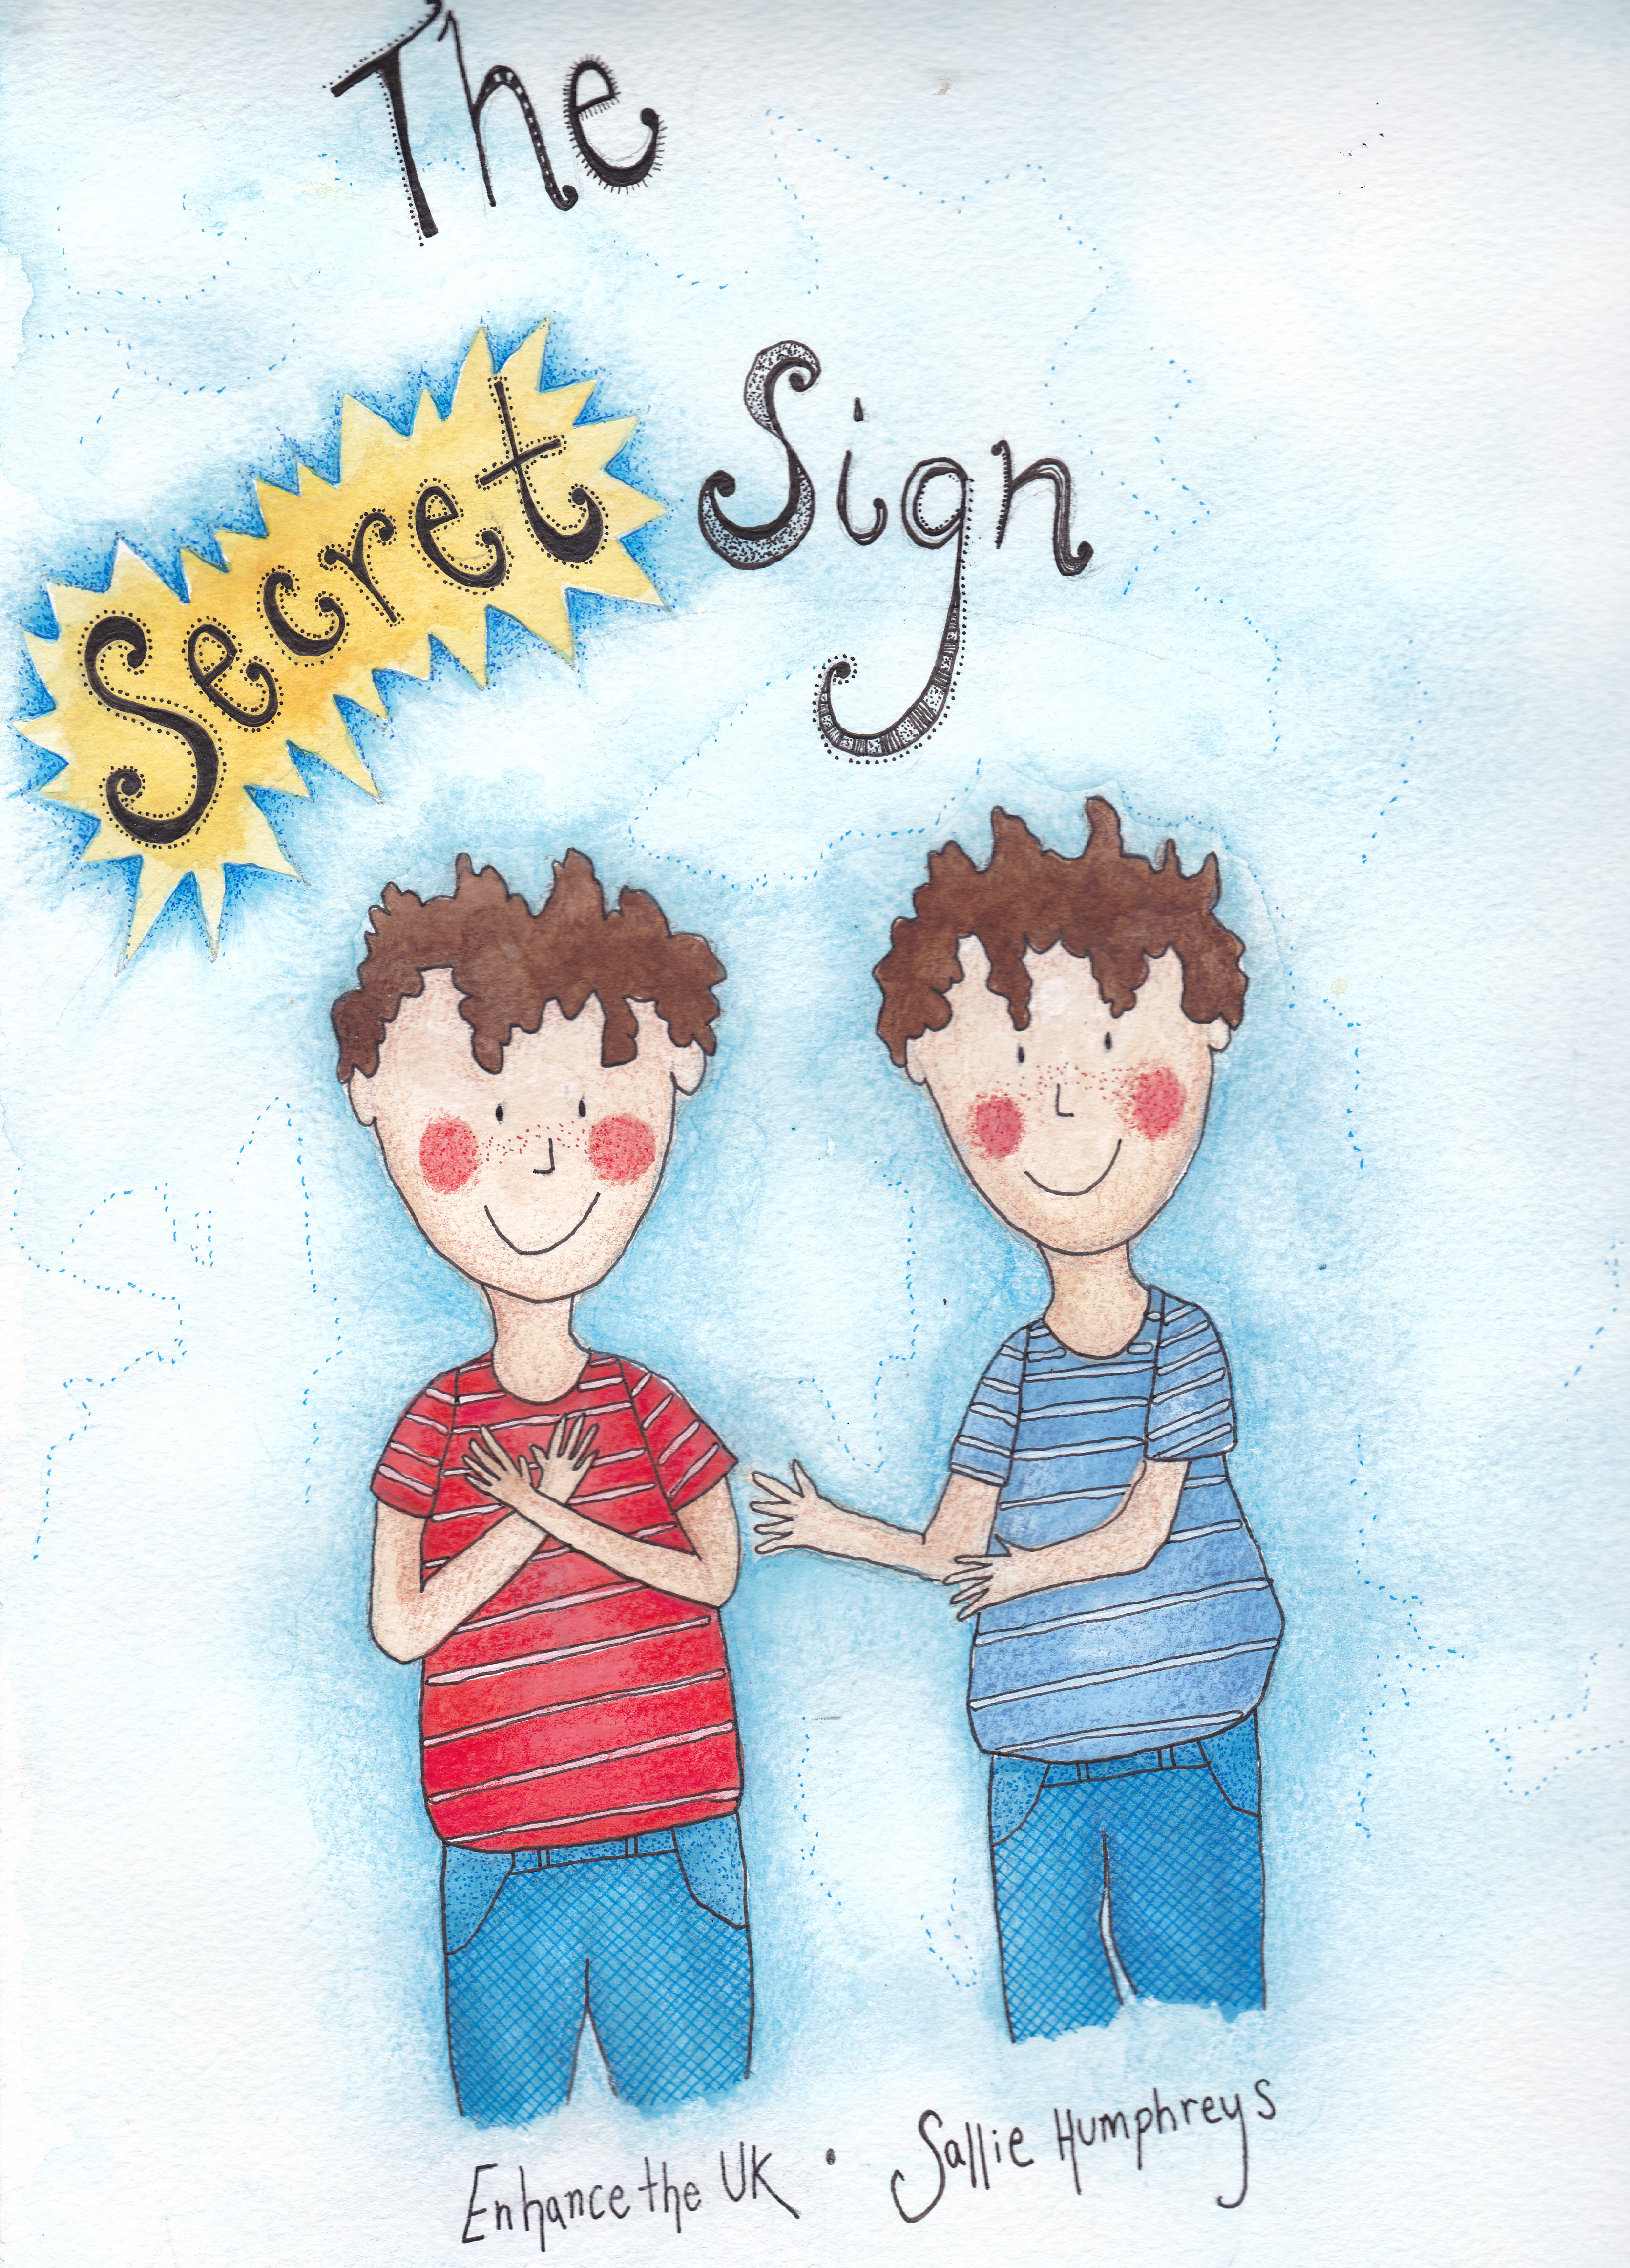 The secret sign cover